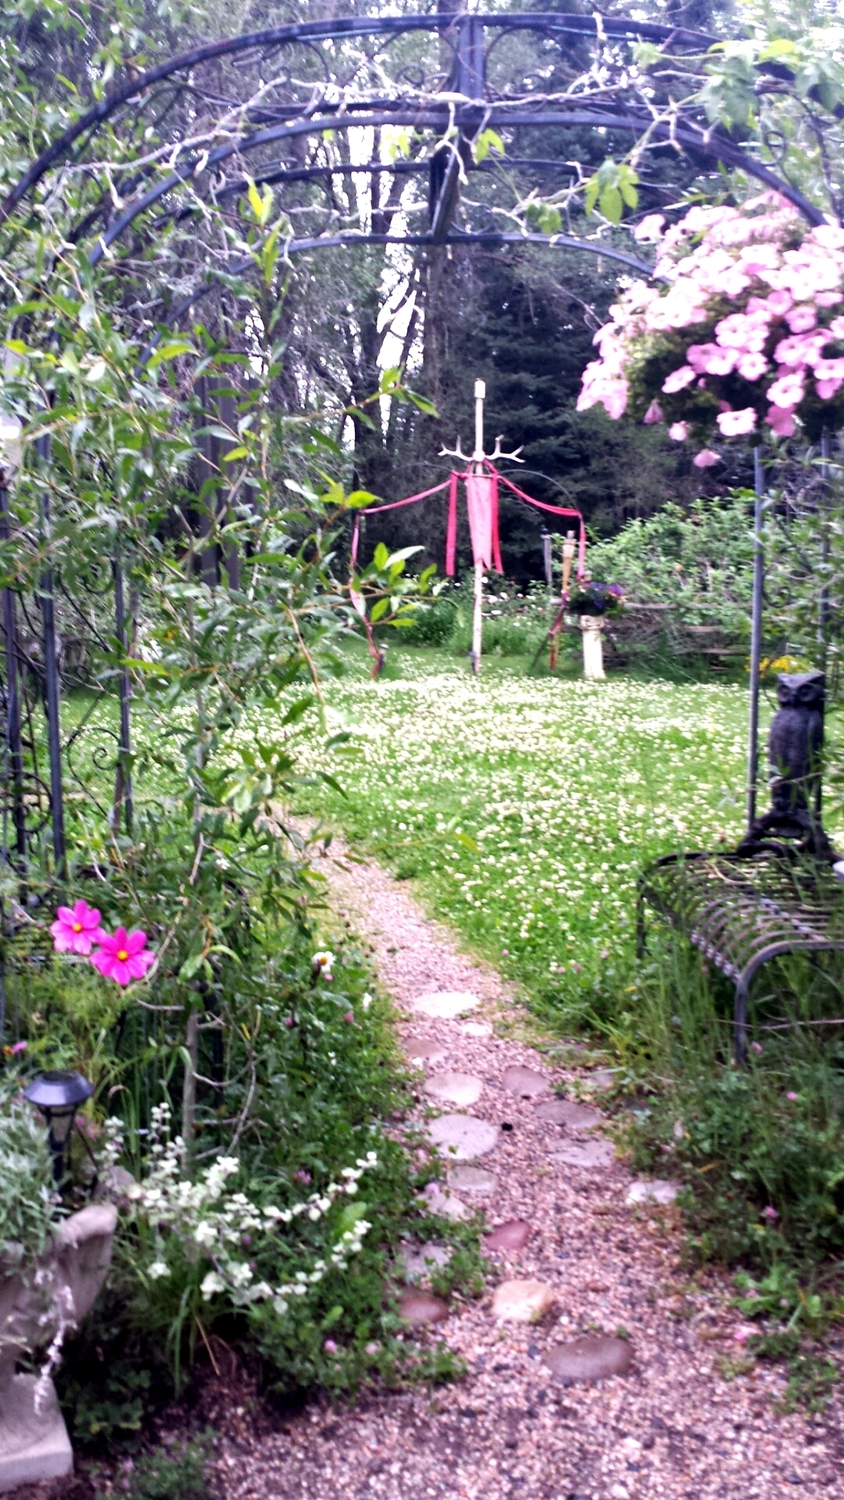 Gallery Photo of Path to Discovery, entering my home office and yard